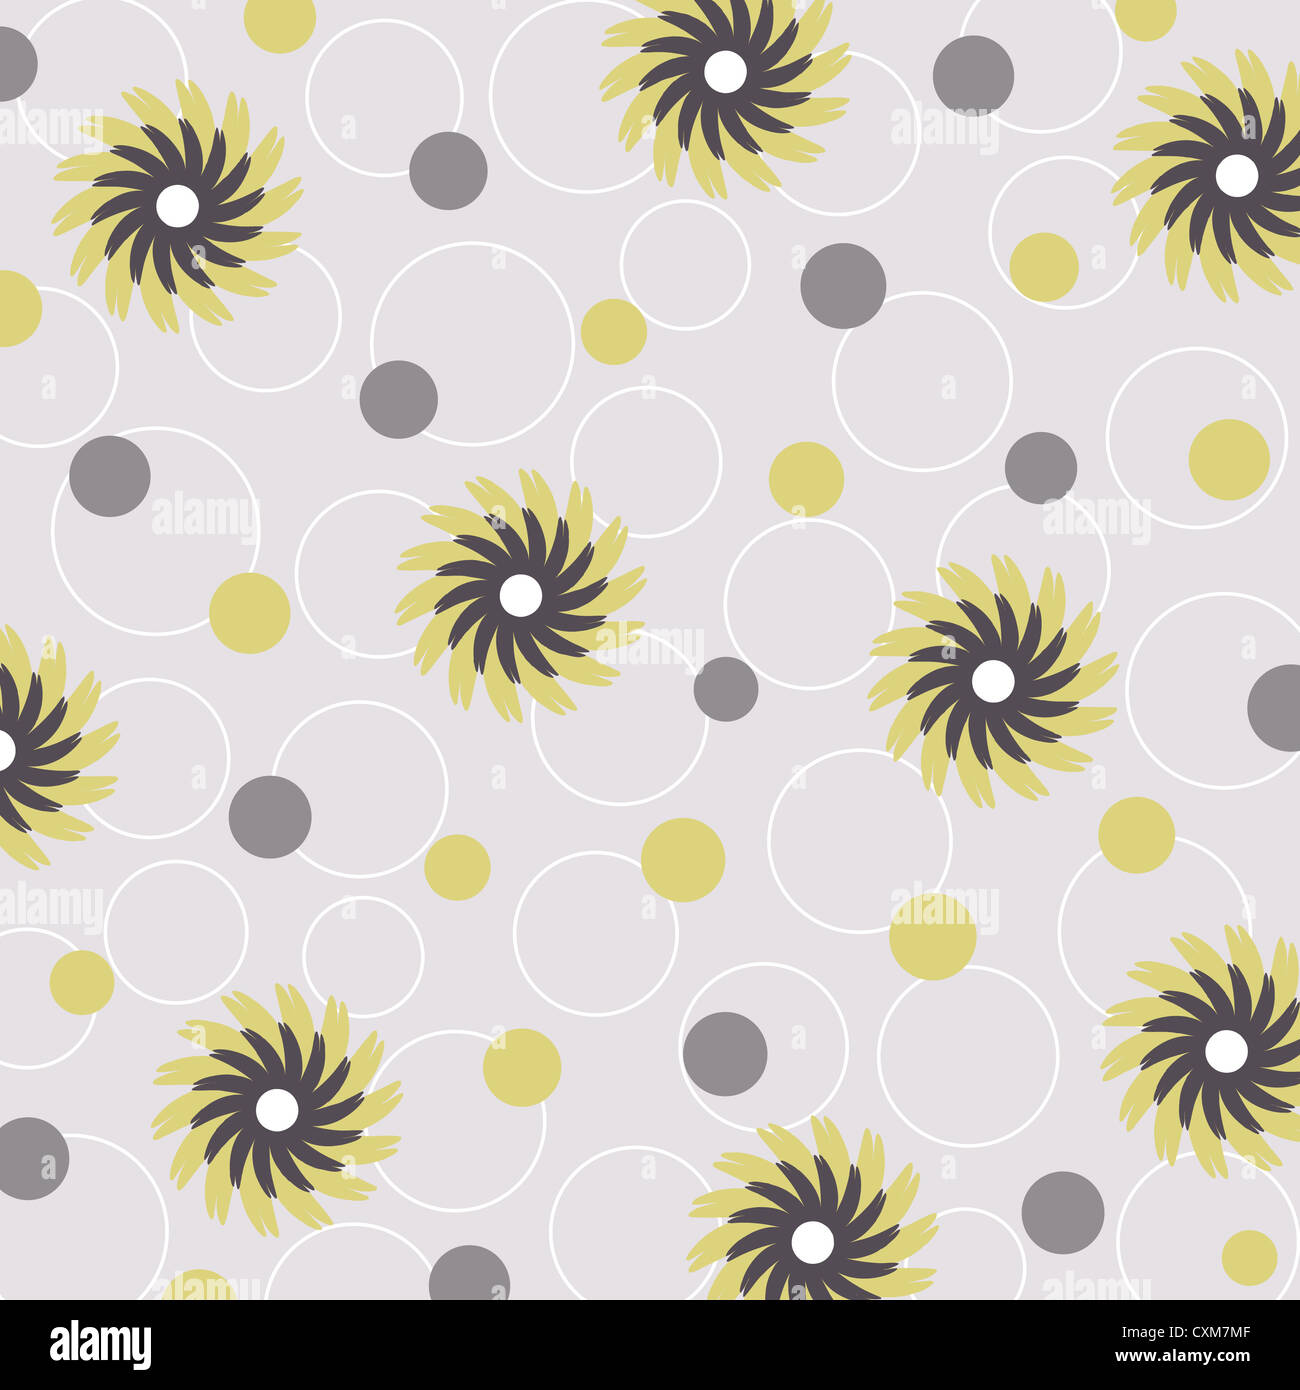 Artistic circles and floral pattern in green and grey Stock Photo